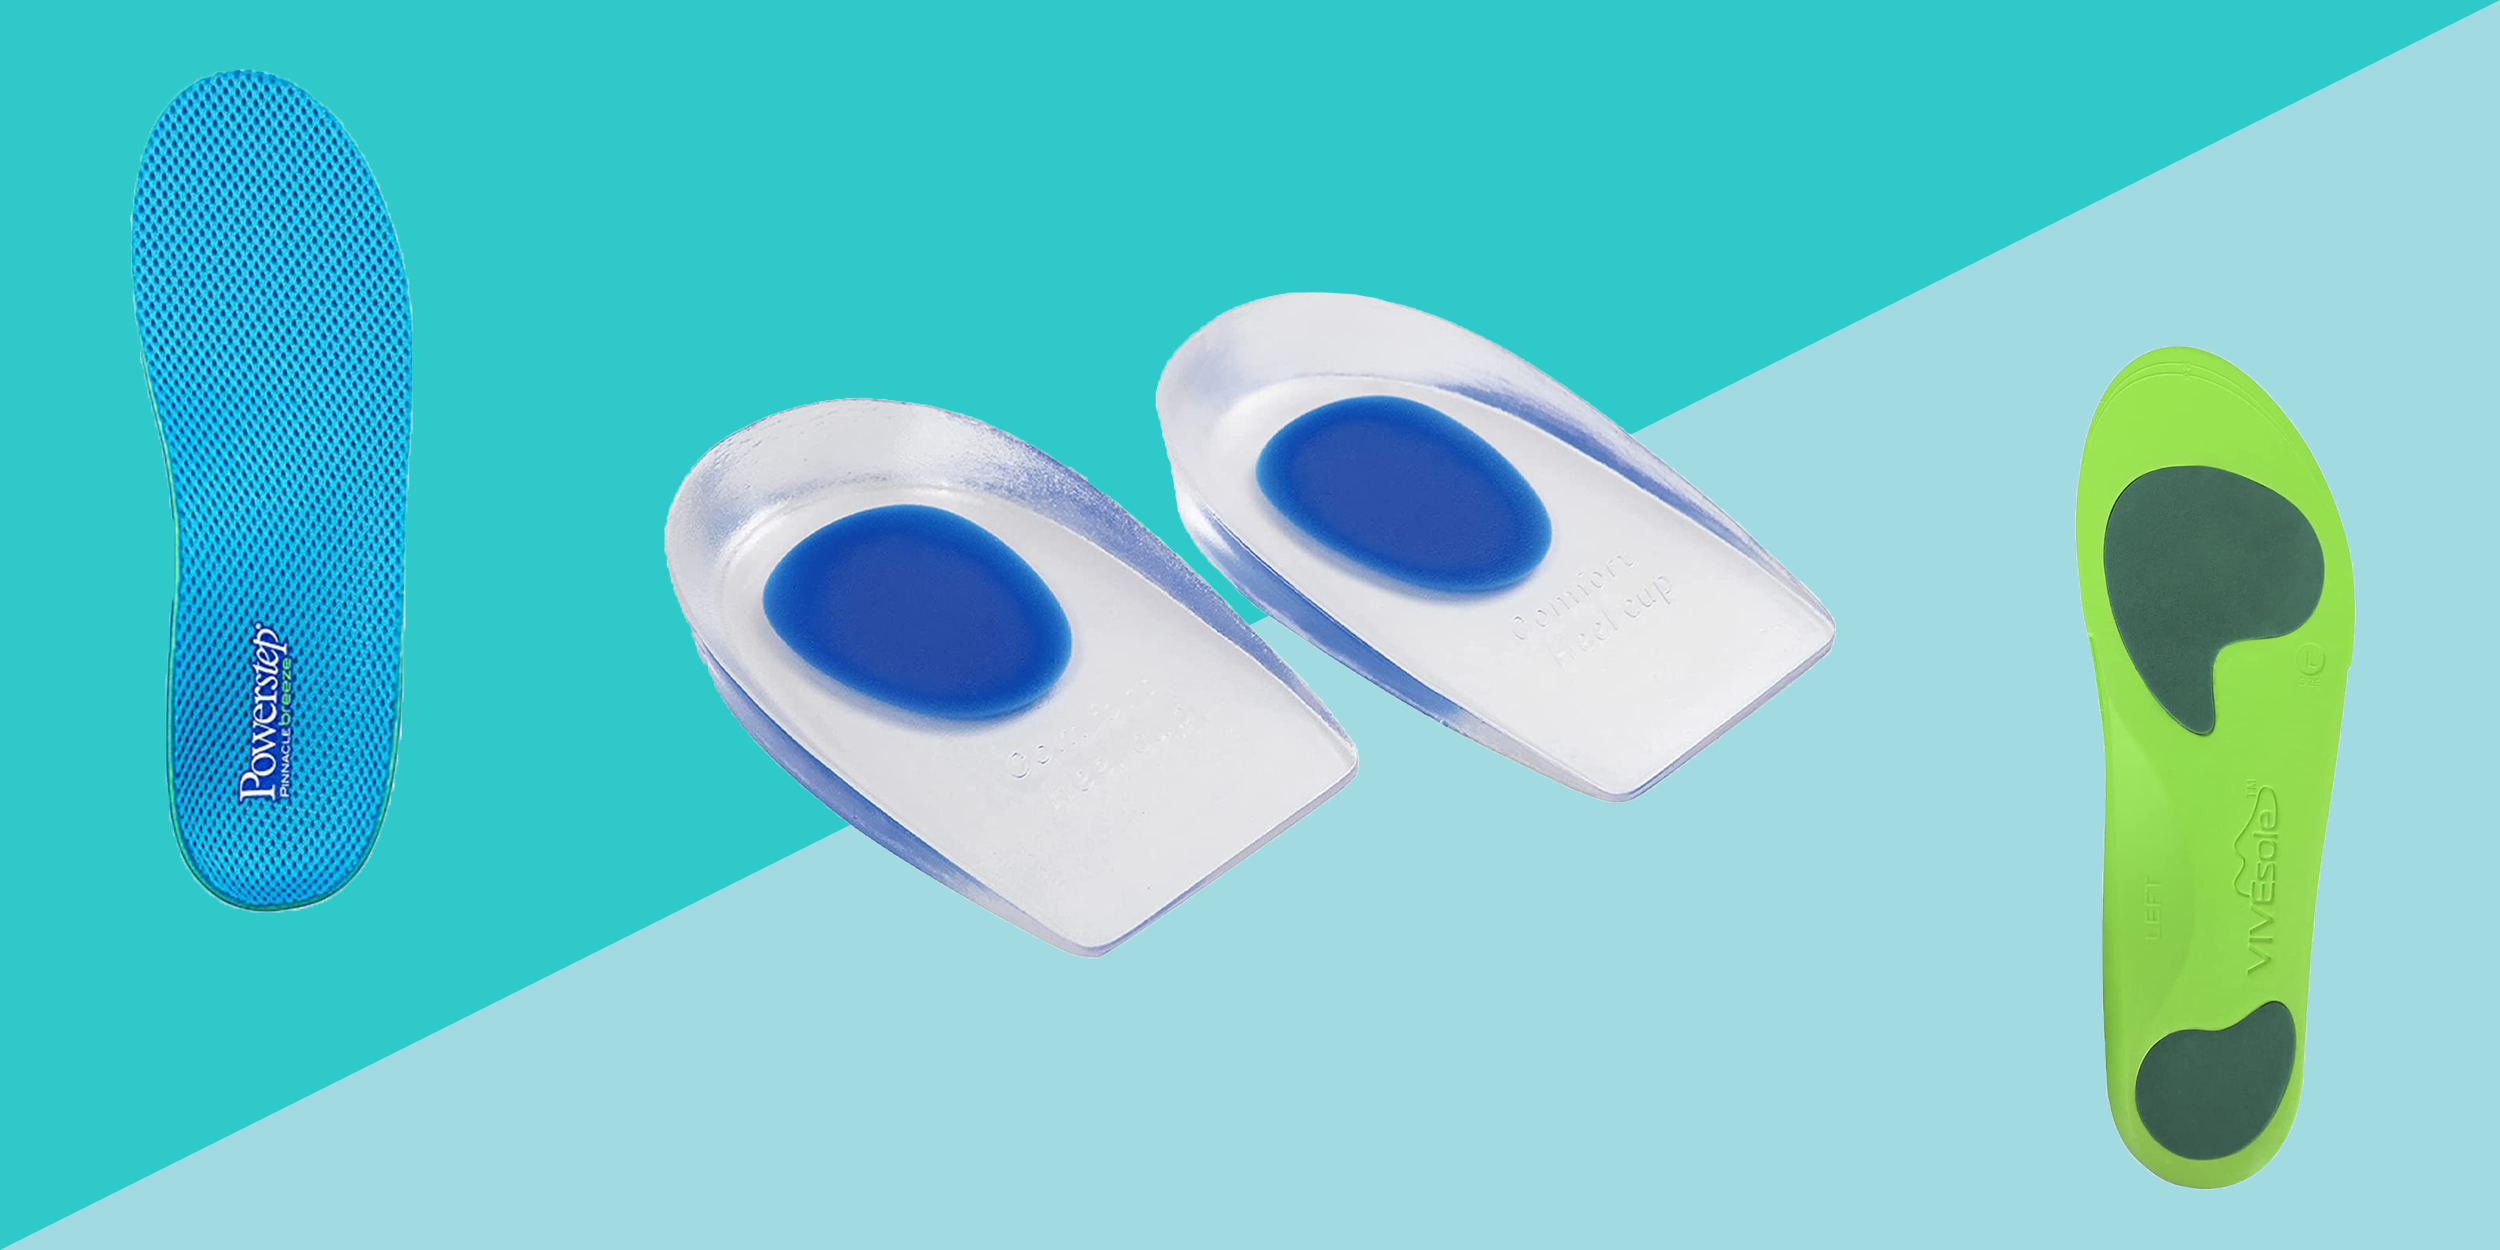 Arch Support Sleeves Plantar Fasciitis Insoles with Foot Relief Cushions Pad for Men and Women 2 Pairs Compression Orthotic Inserts for Plantar Fasciitis Heel Spurs Flat Feet Fallen Arches Achy Feet 